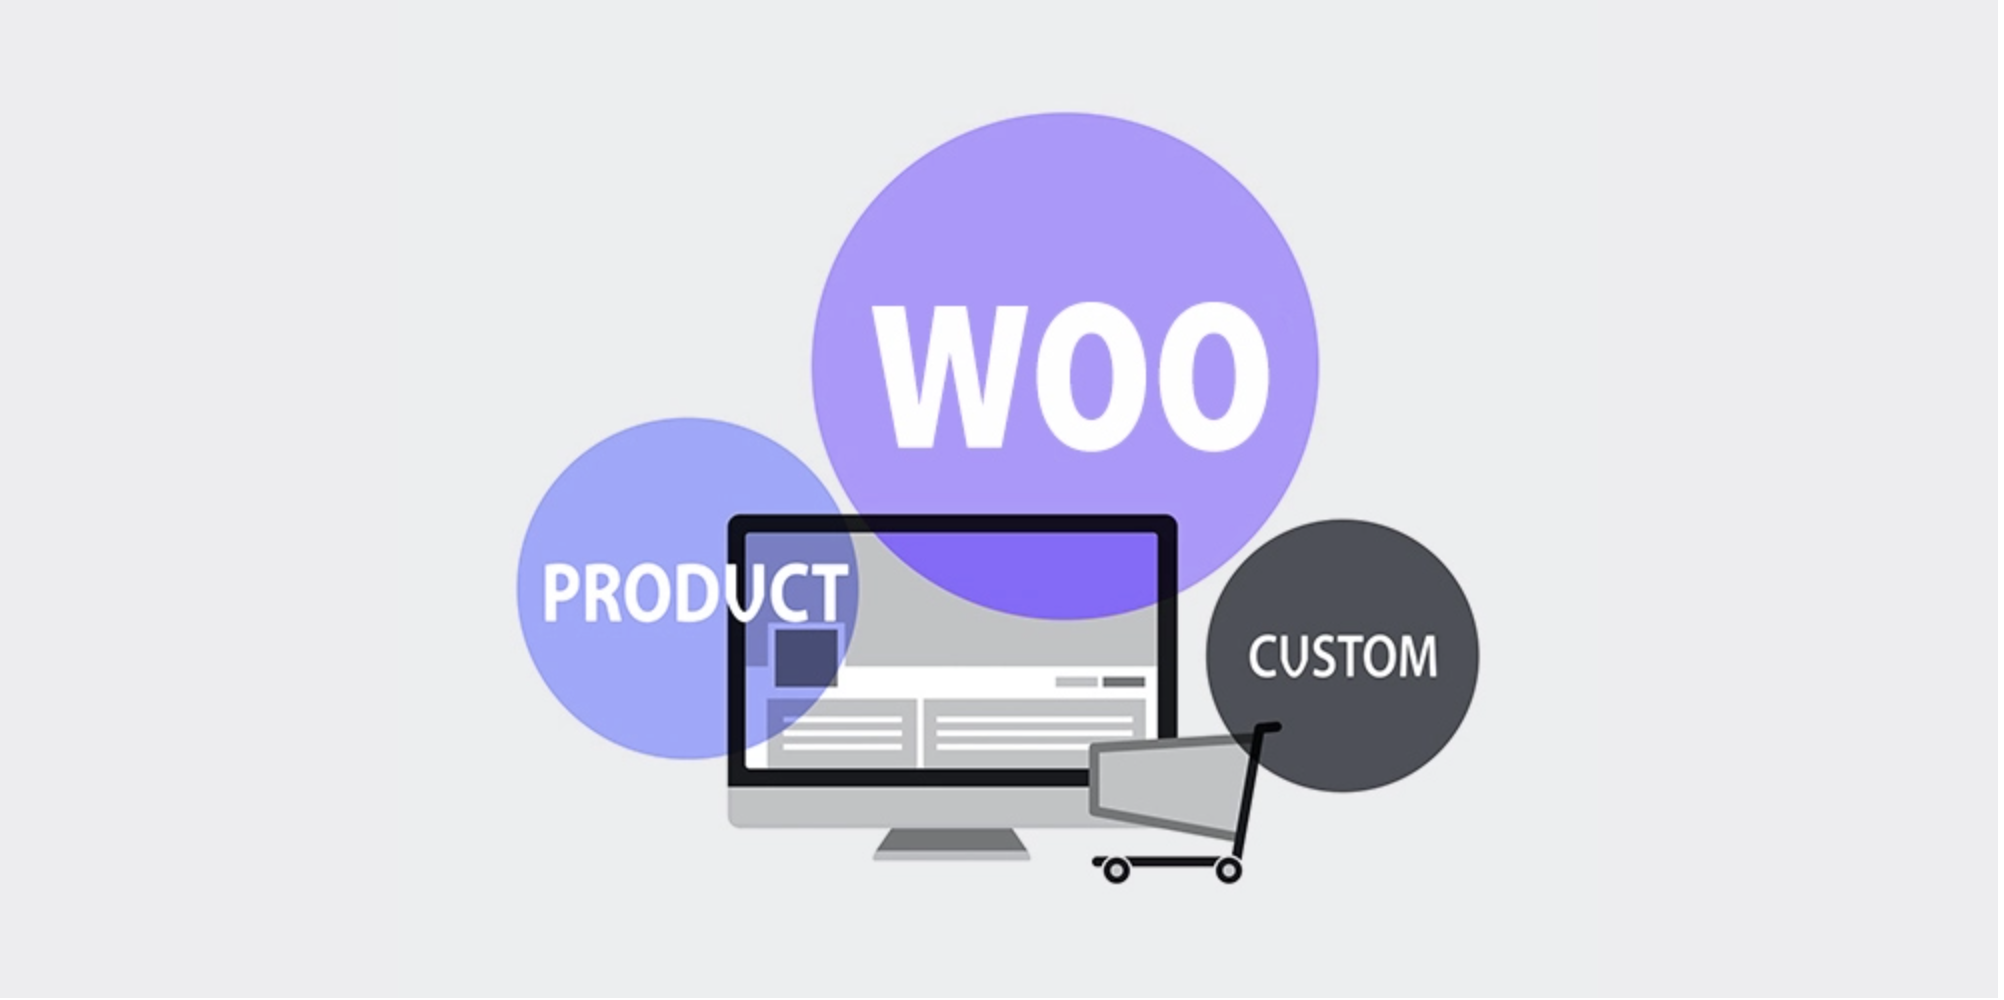 Custom WooCommerce Product Pages